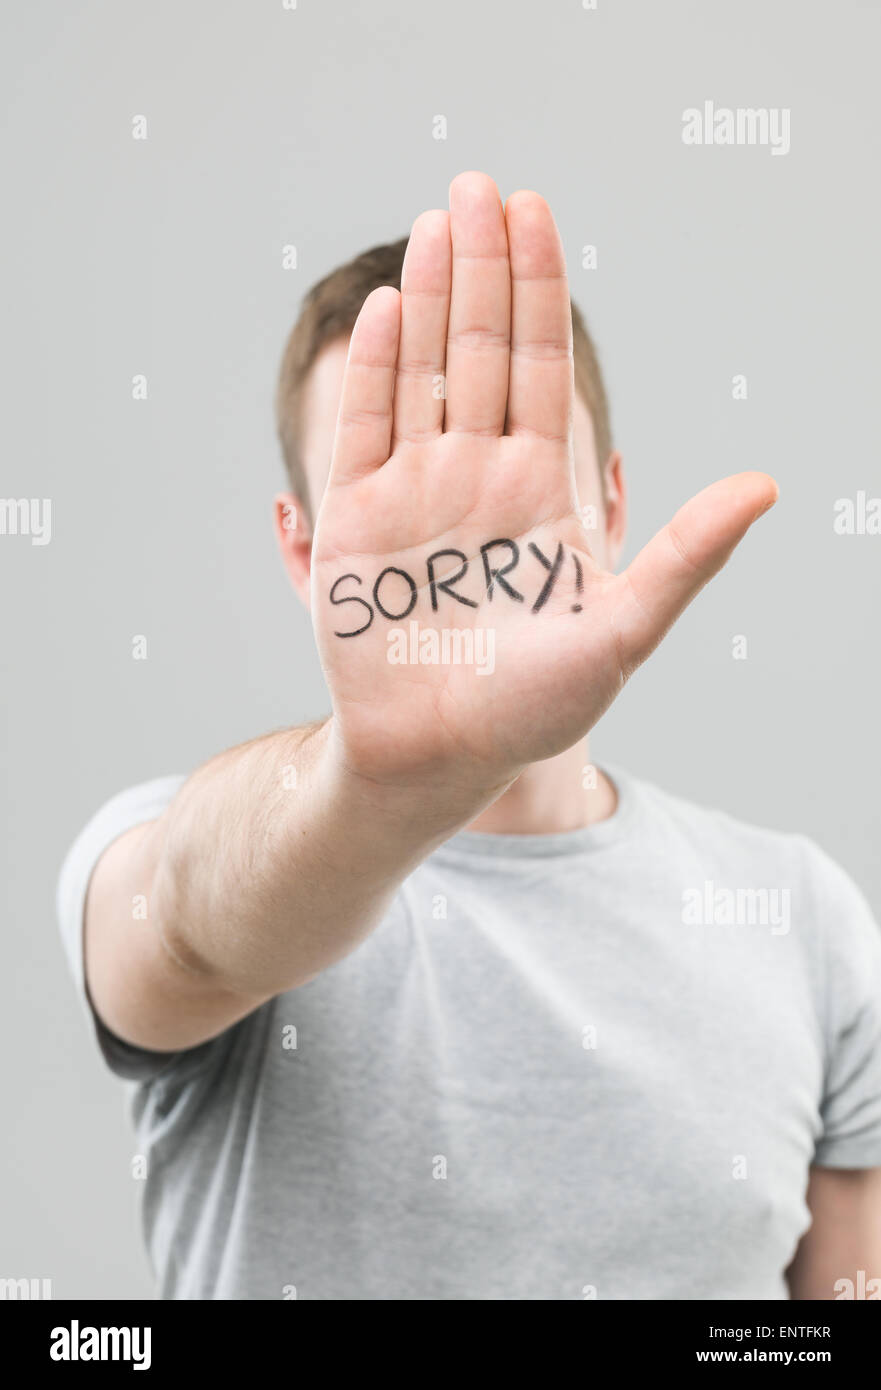 close-up of male hand with sorry message written on it Stock Photo